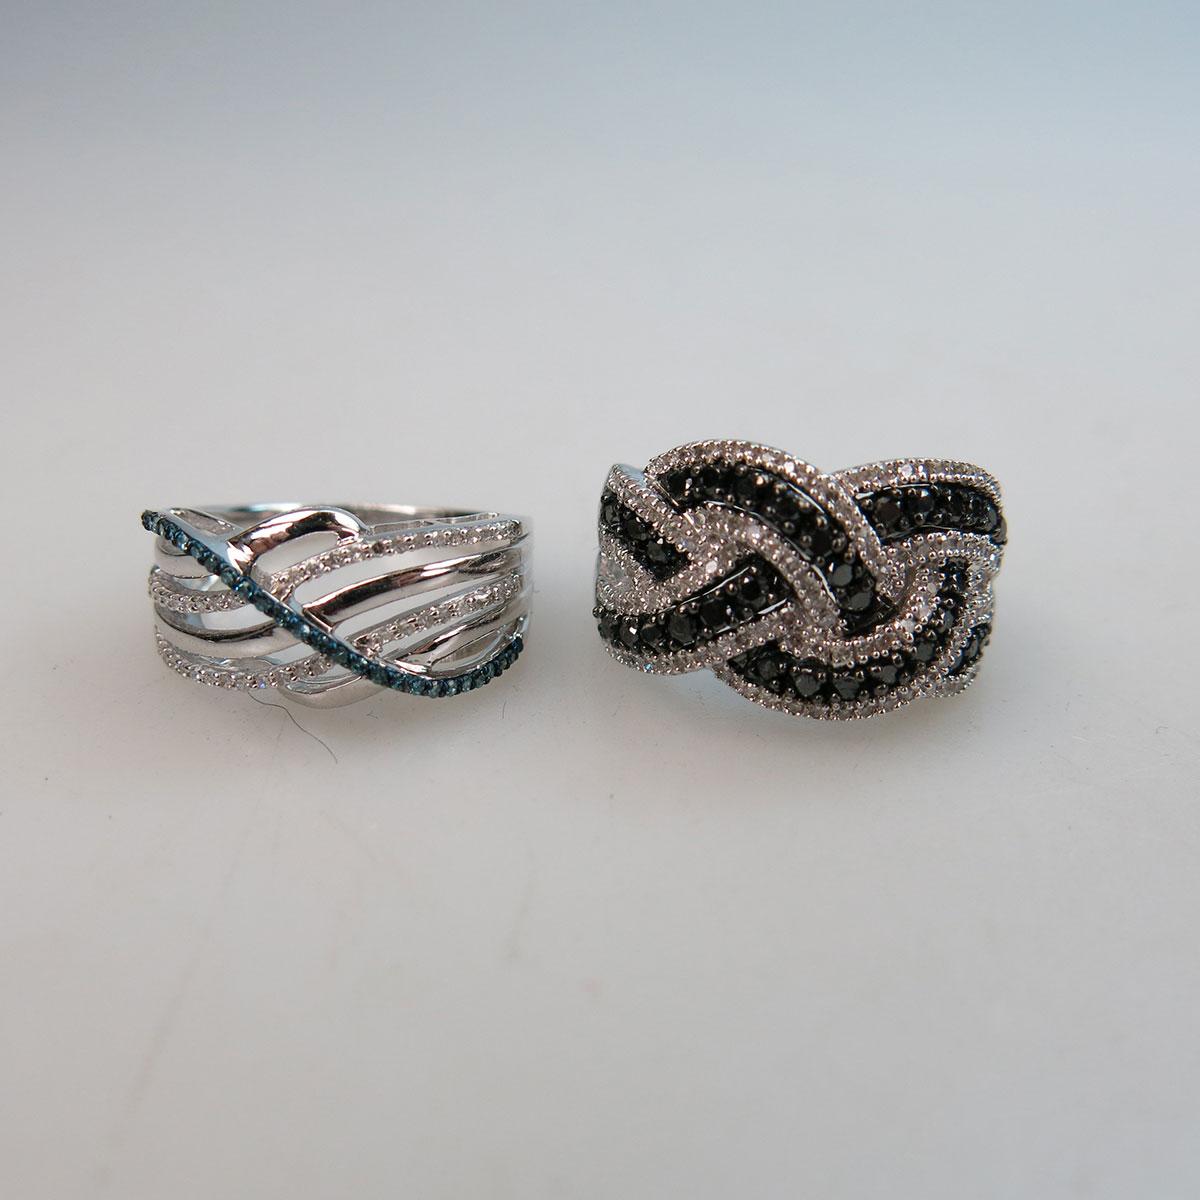 2 x Sterling Silver Ring